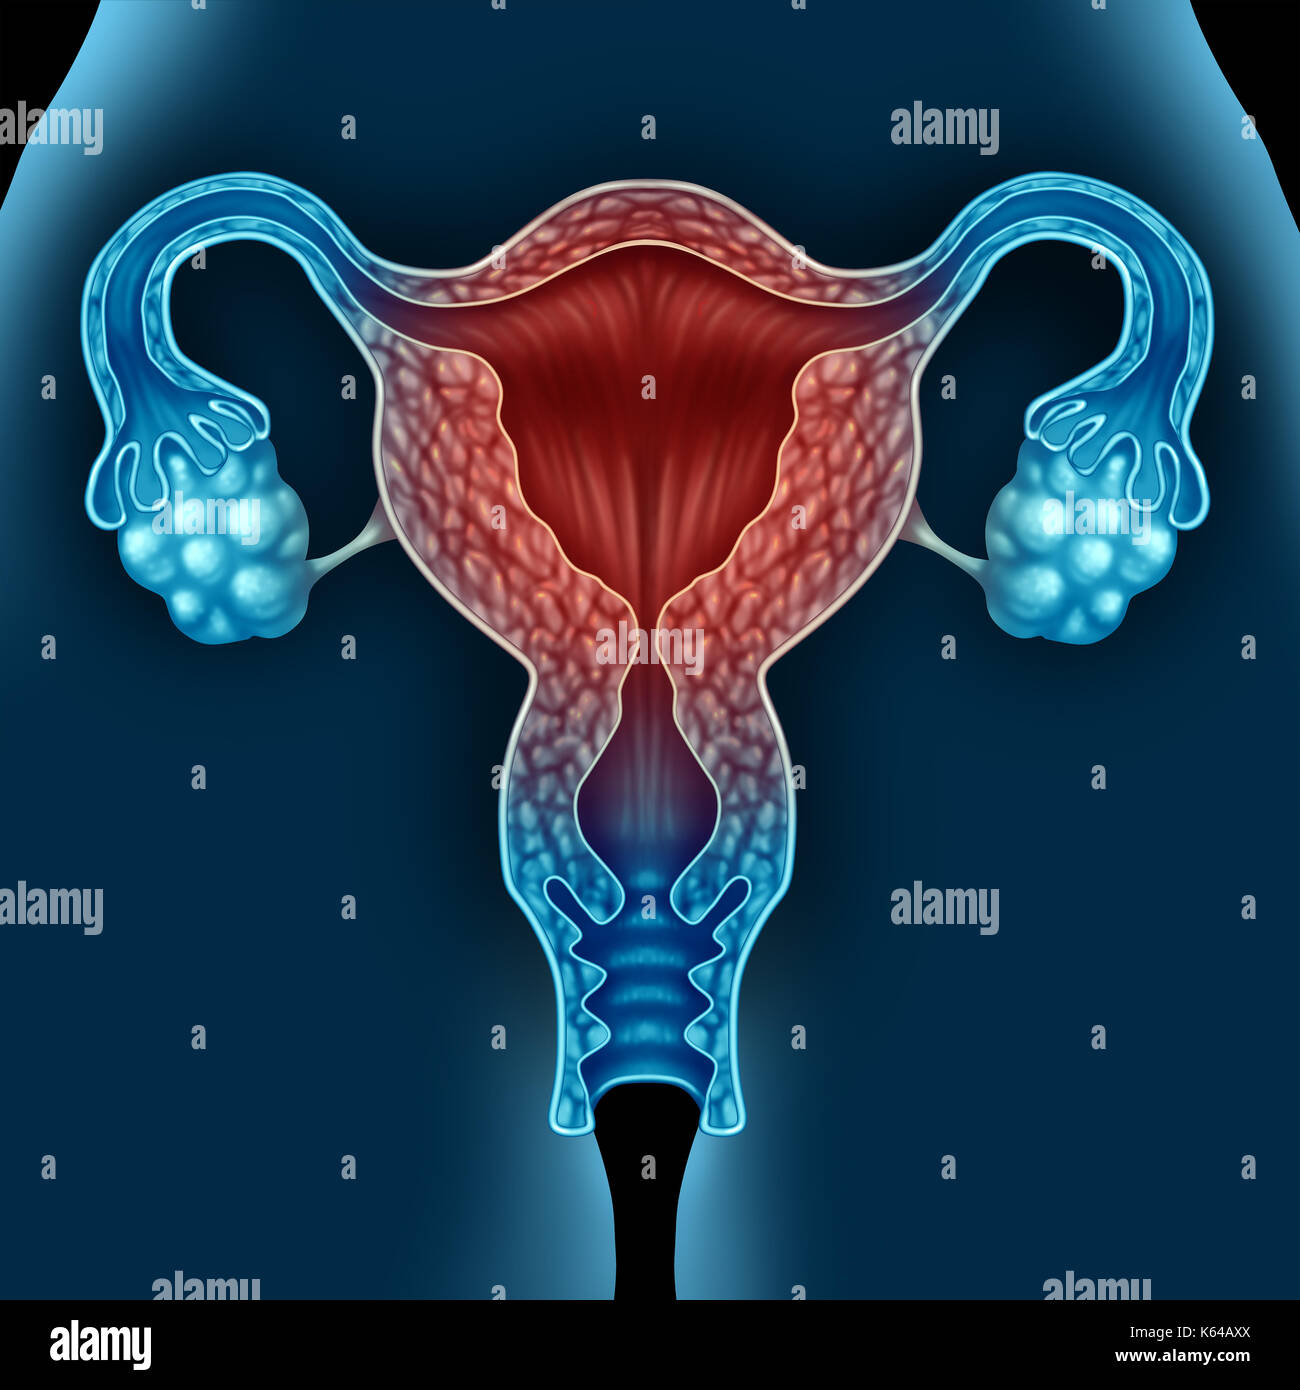 Menopause female medical condition due to aging as a human uterus as a menopausal condition concept in a 3D illustration elements. Stock Photo